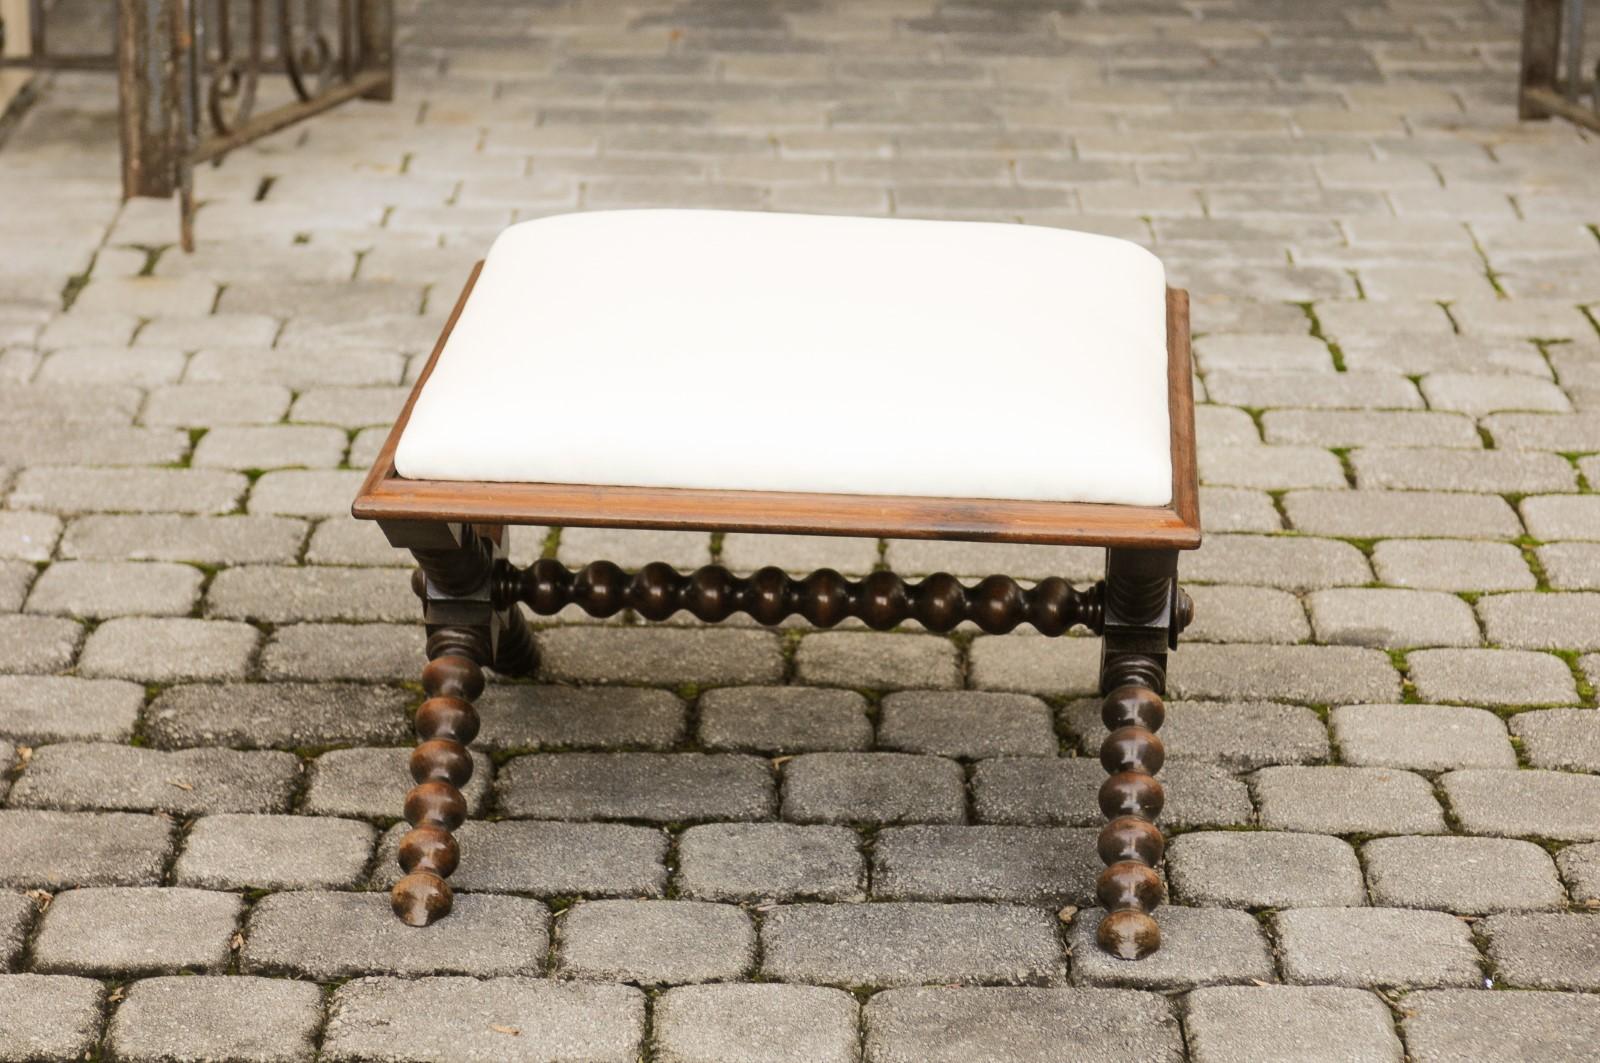 An English mahogany stool from the late 19th century, with spool legs and new upholstery. Born in England during the later years of the 19th century, this stylish mahogany stool features a rectangular seat, newly recovered with a simple muslin